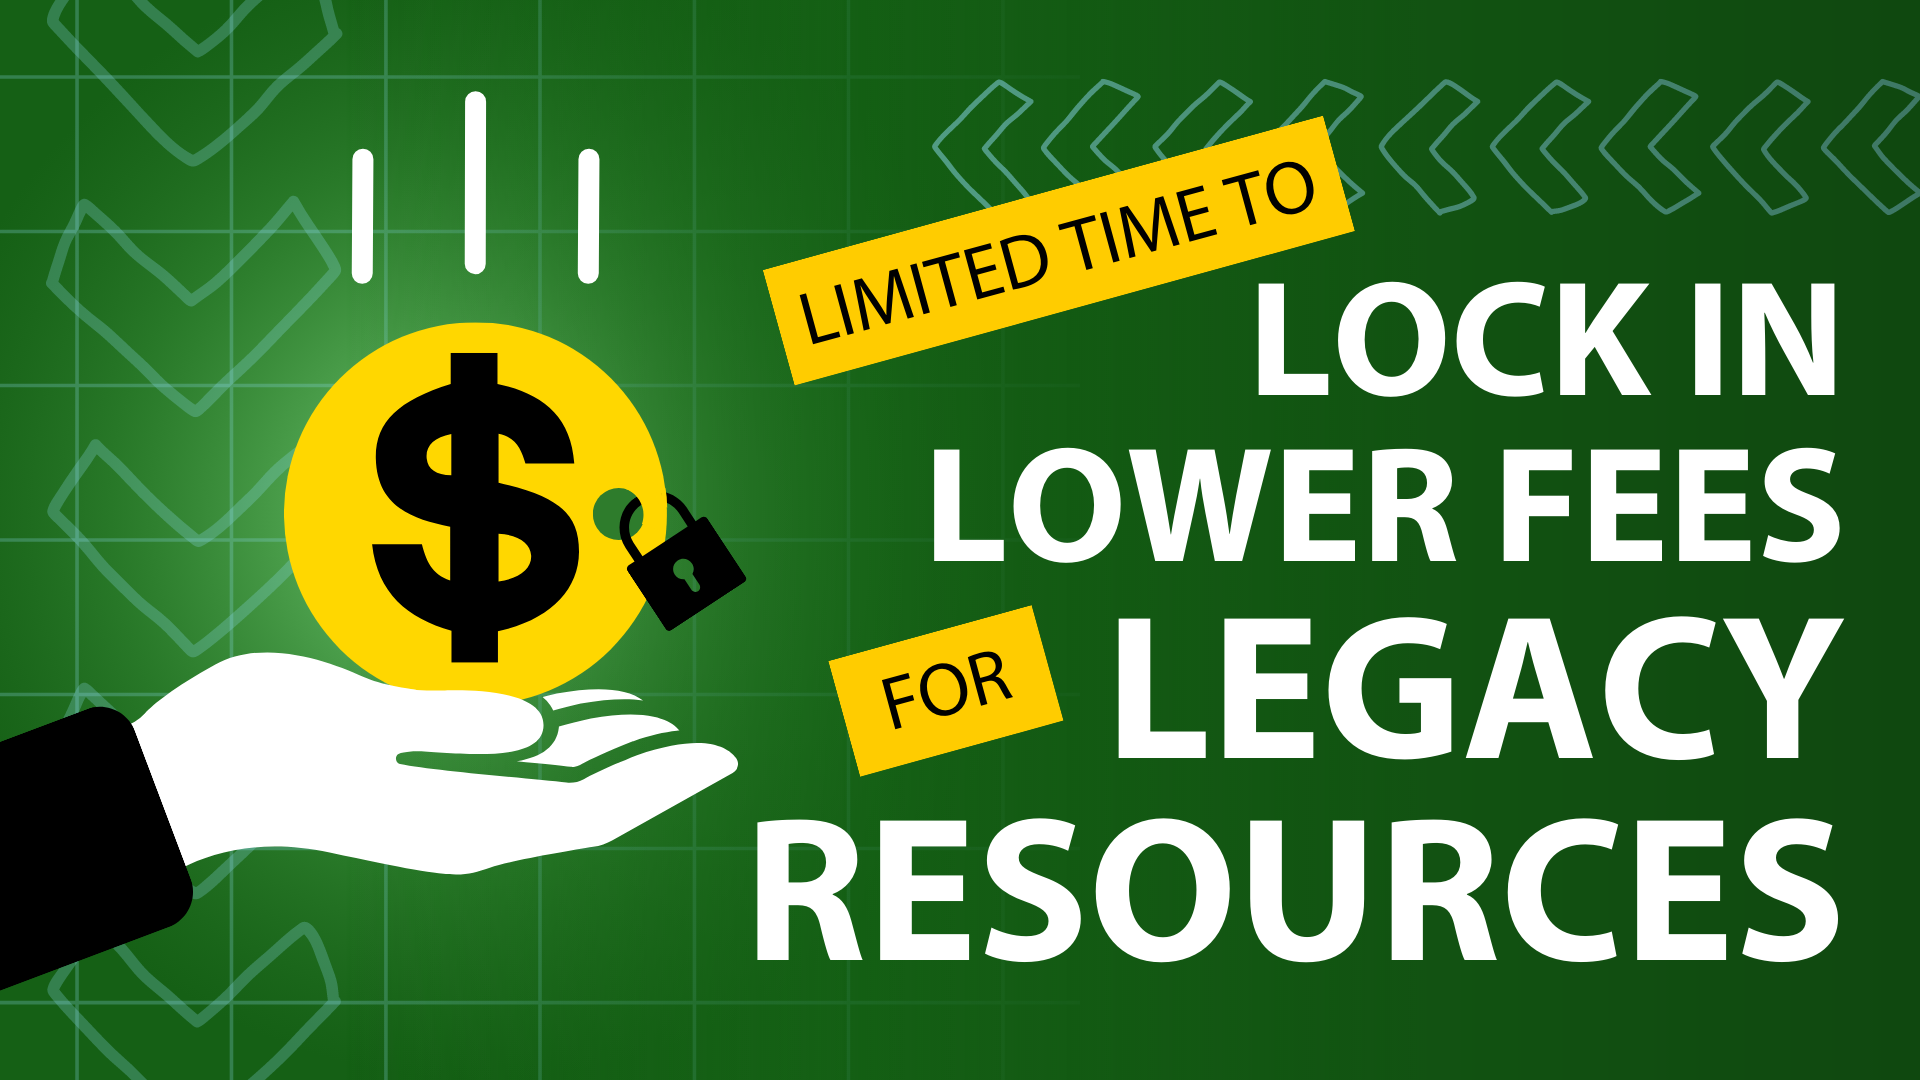 Legacy Resource Holders Have Limited Time Left to Lock in Lower Fees